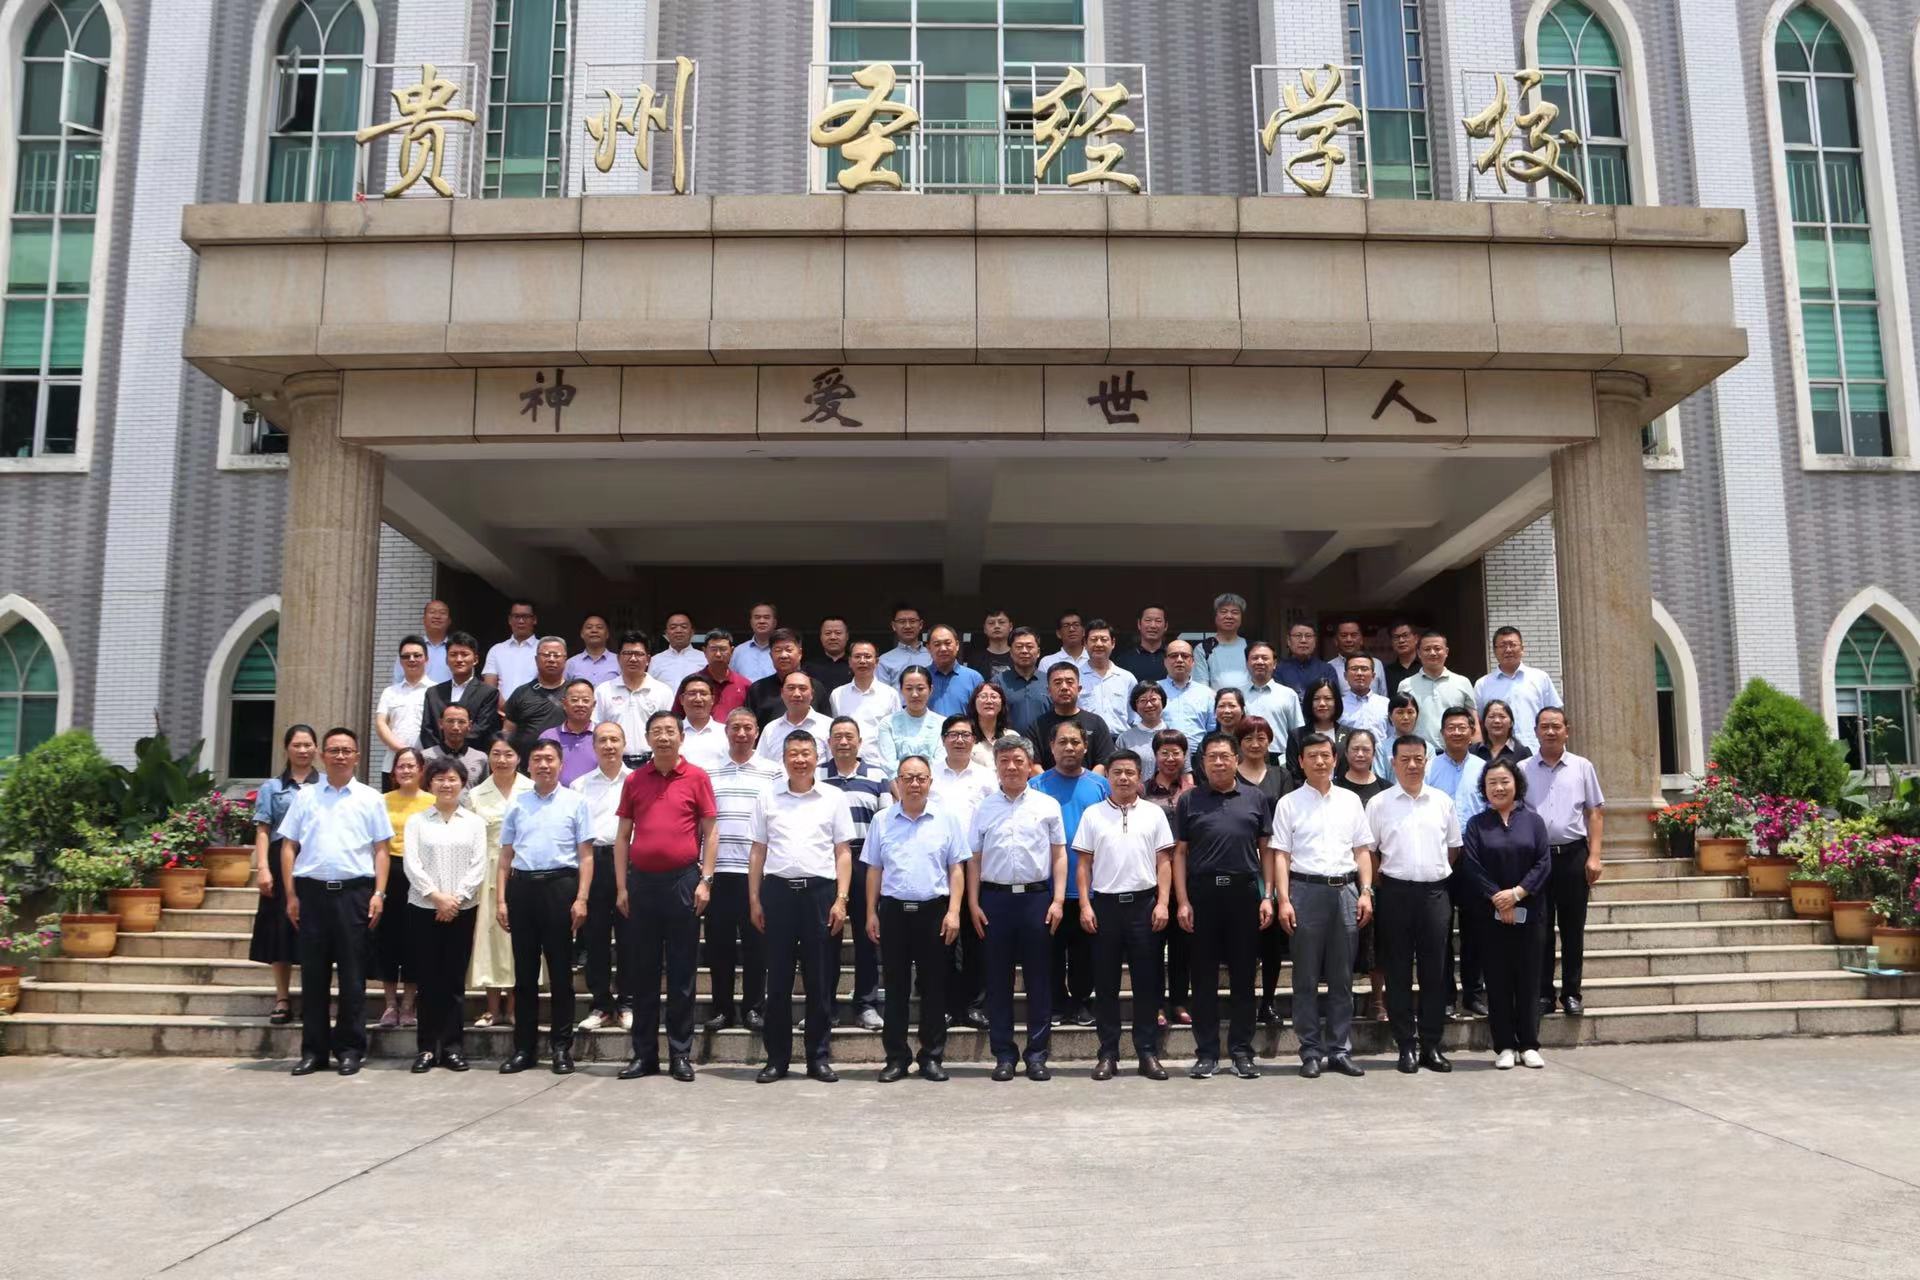 The delegation from the China Theological Education Workshop took a group photo with the school's leaders and faculty in front of the Guizhou Bible School in Guiyang city, Guizhou province, on July 25, 2023.